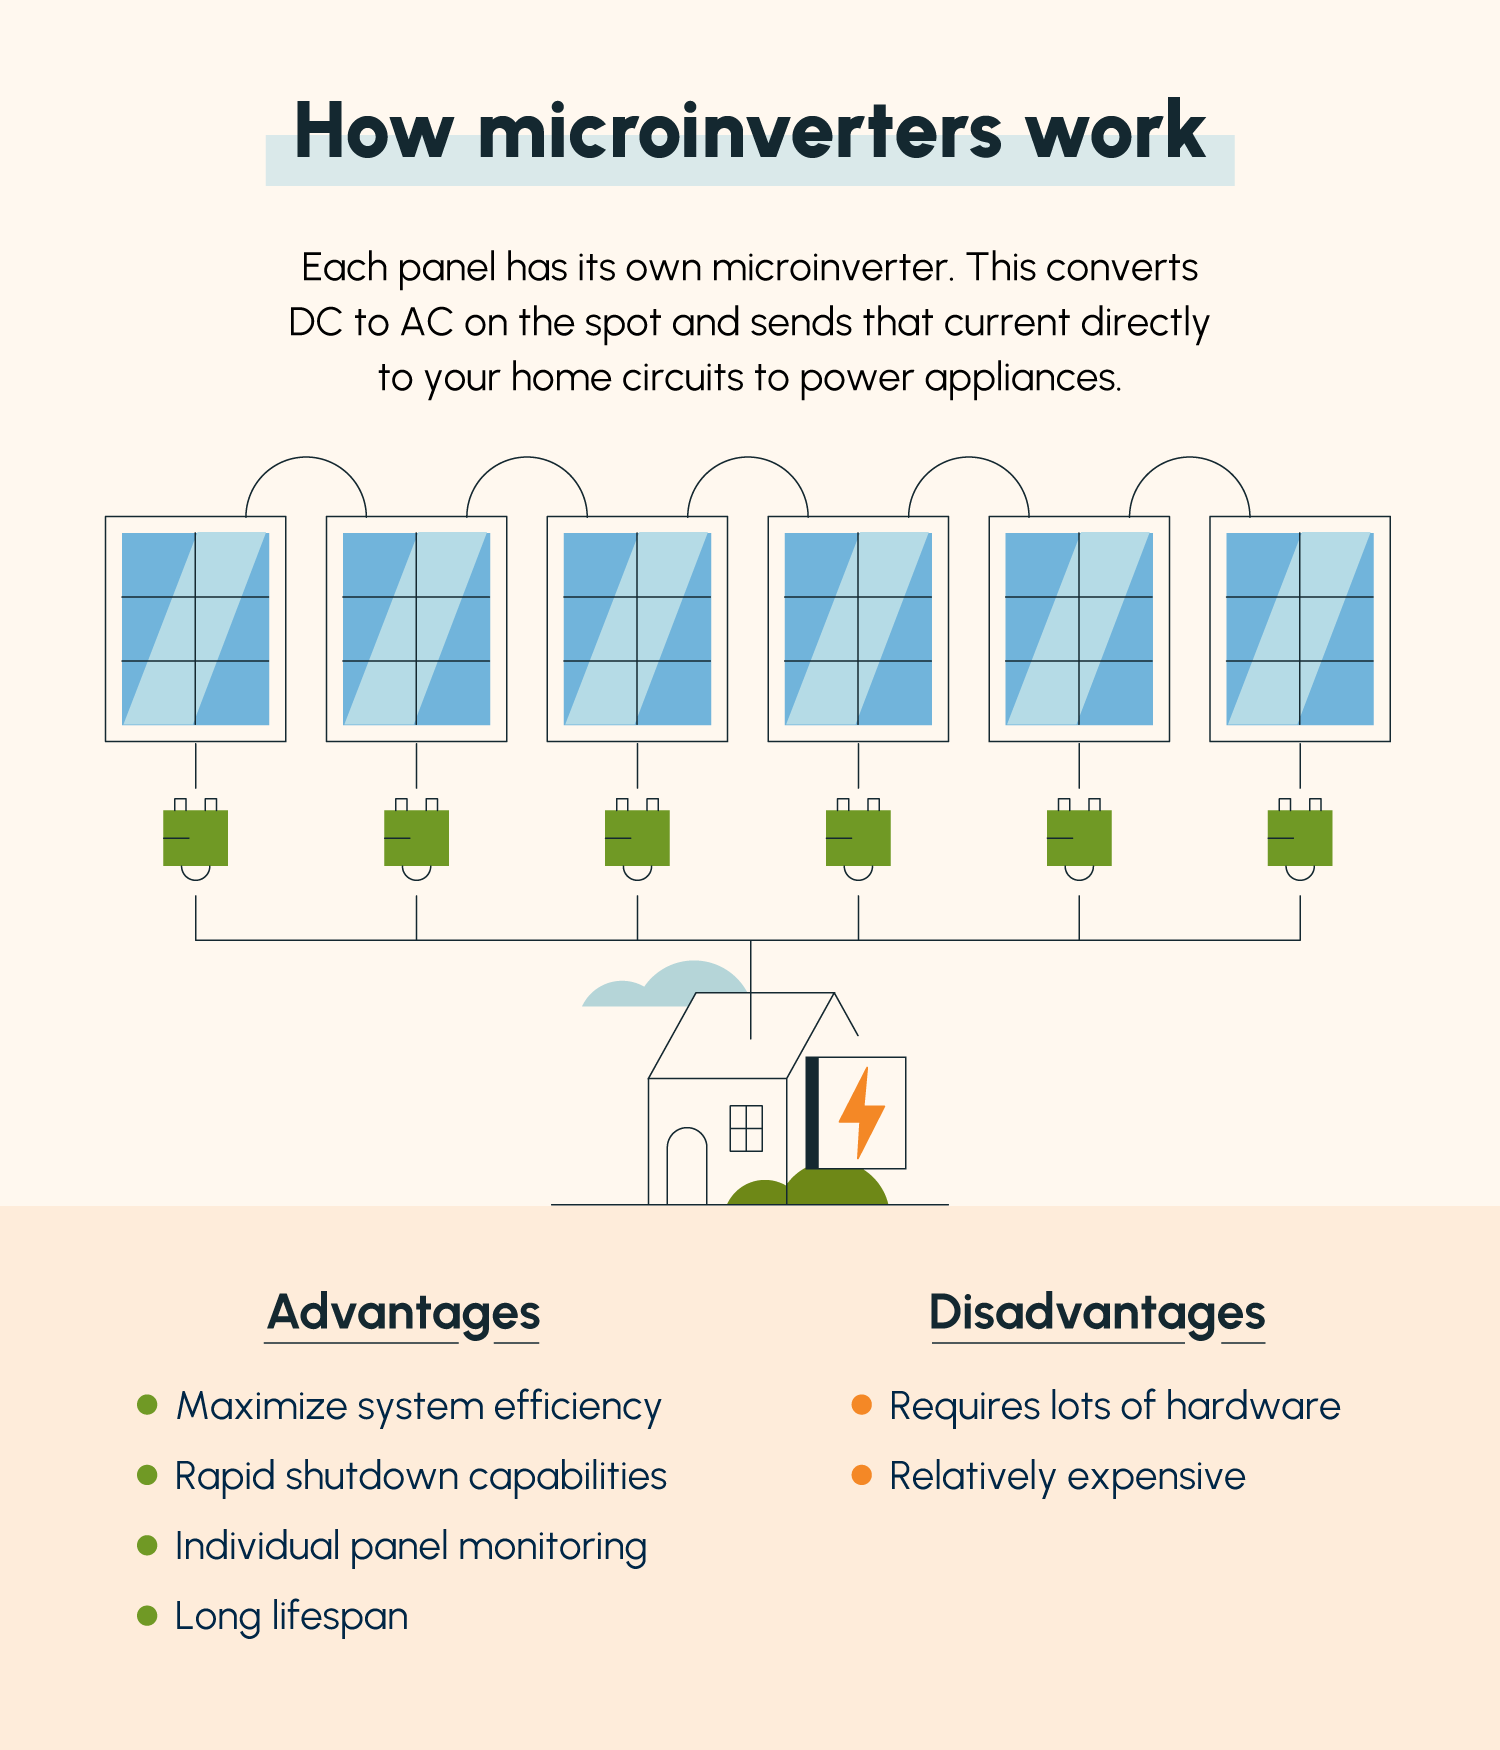 An illustration of how microinverters work followed by a list of advantages and disadvantages of microinverters